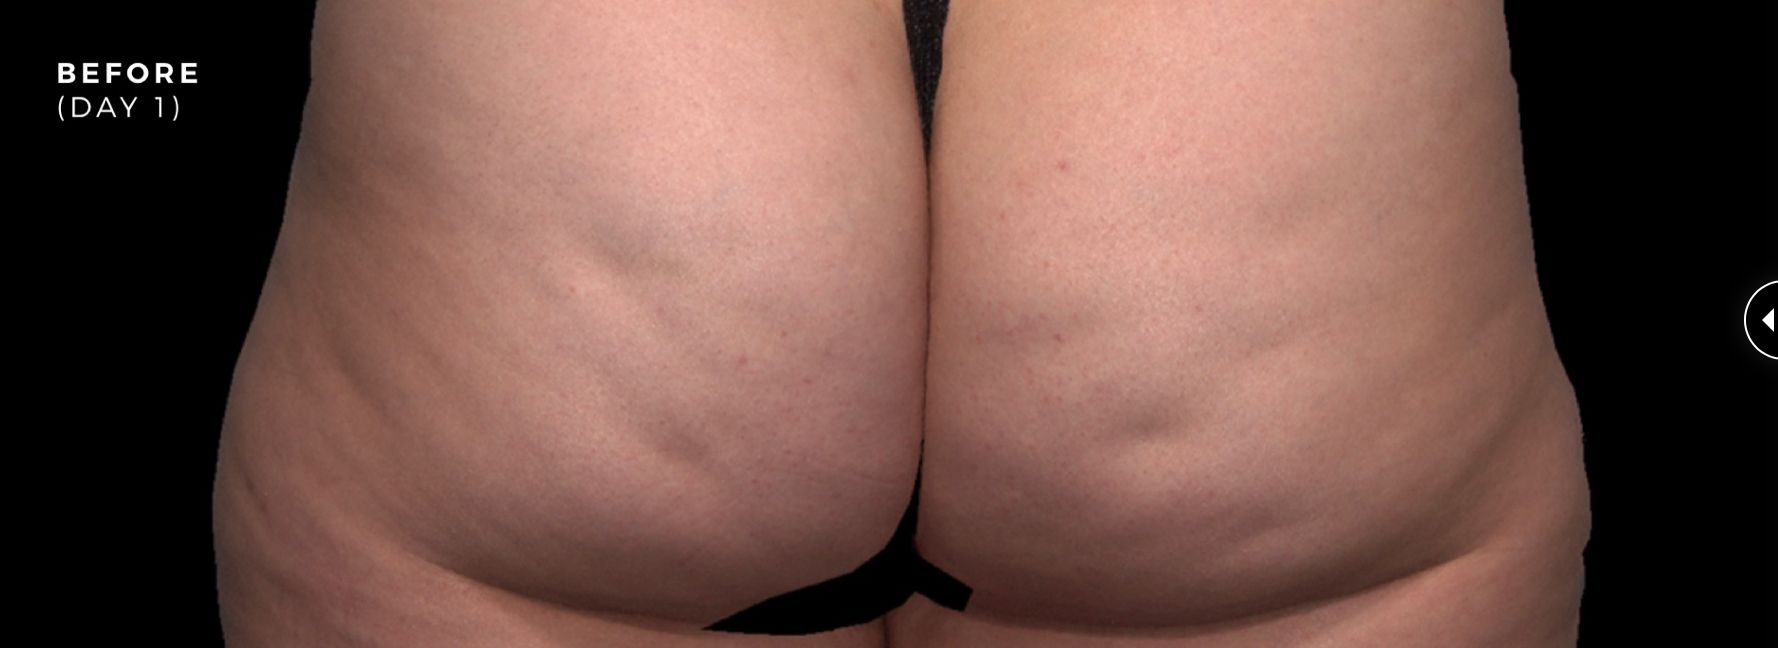 qwo cellulite before image